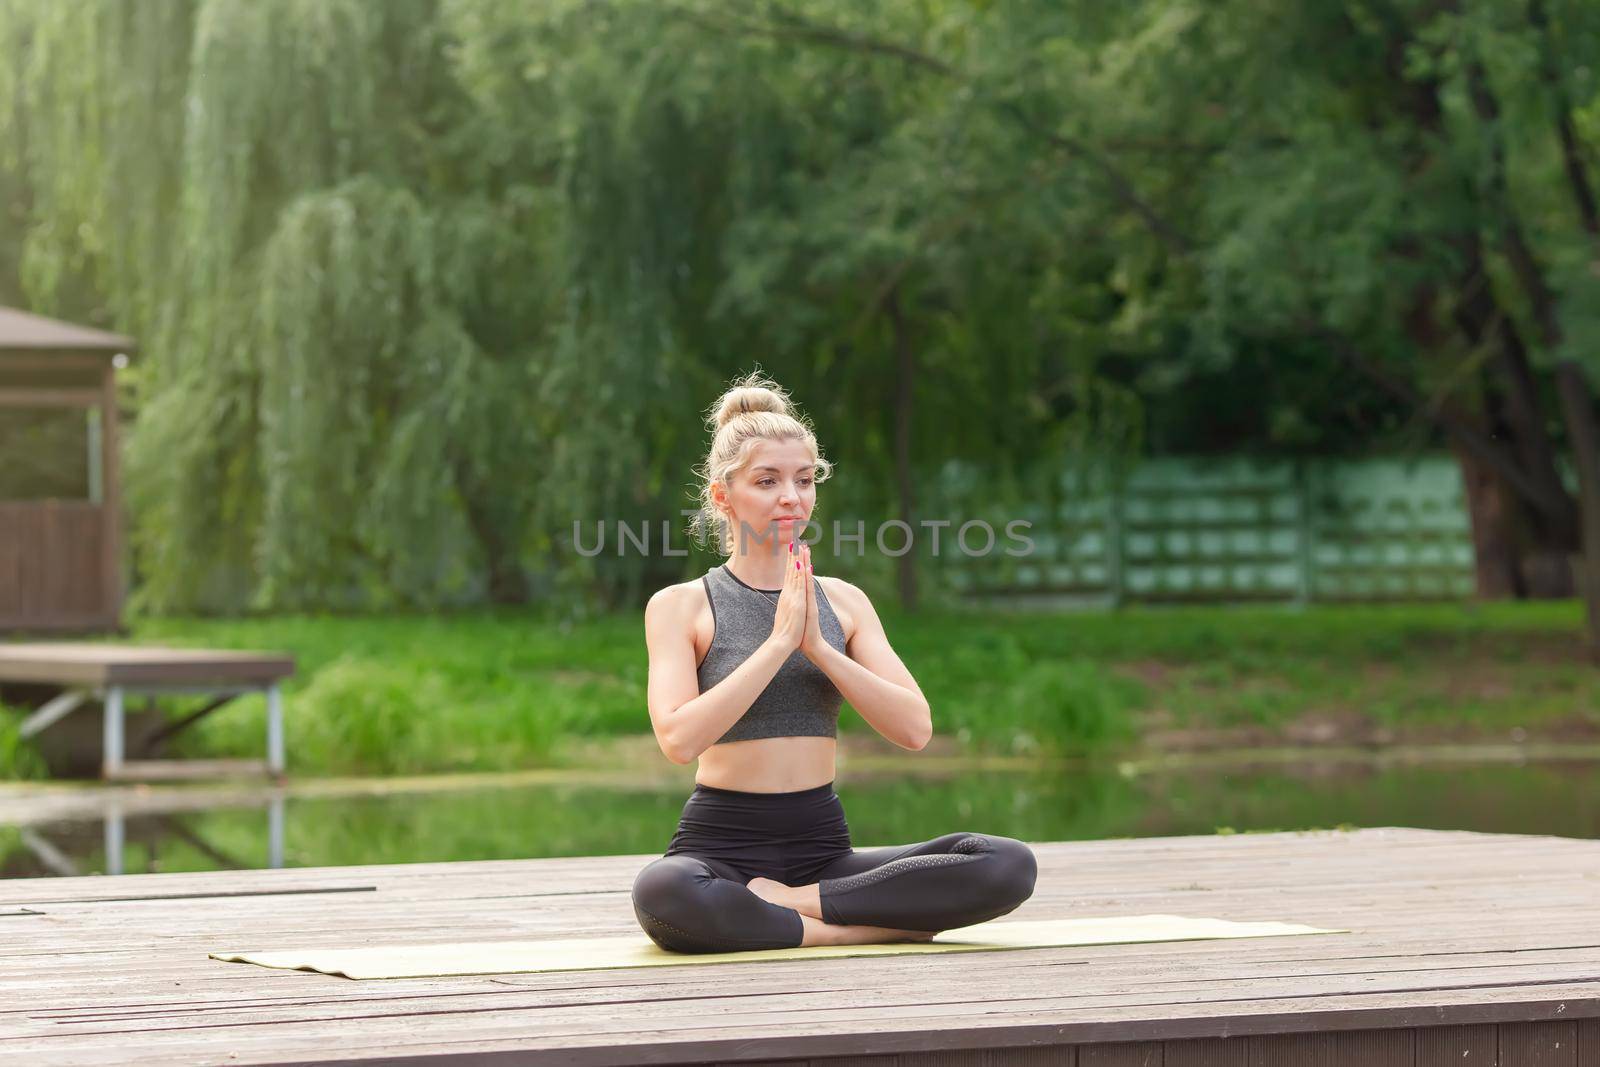 A beautiful woman in a gray top and leggings, sitting on a wooden platform by a pond in the park in summer, does yoga with her palms together. Copy space